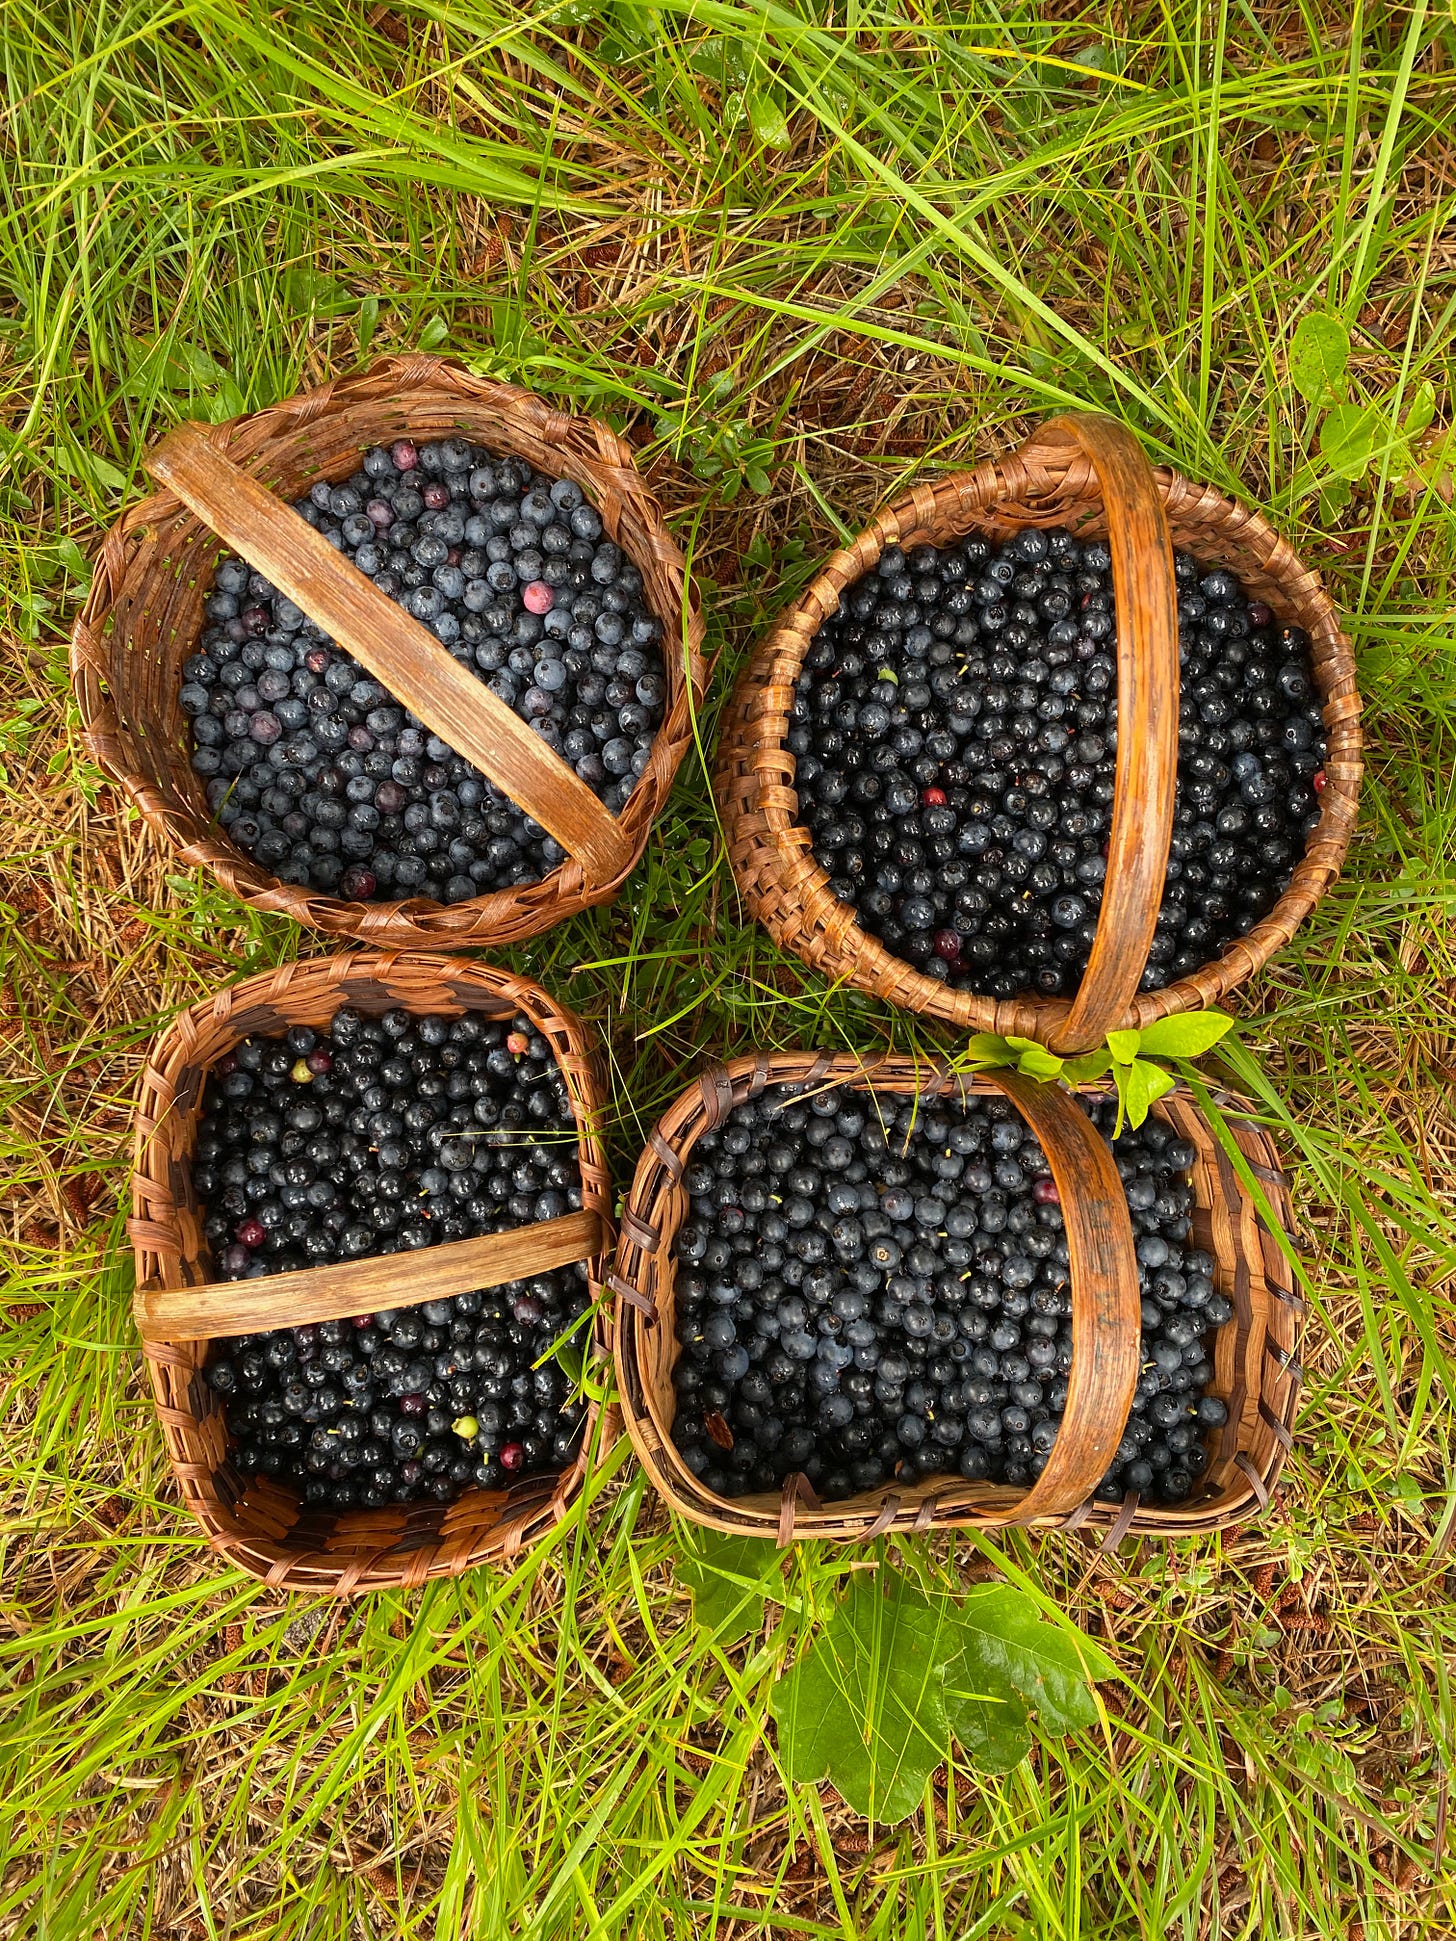 Four woven baskets full of blueberries sit on the damp grass.